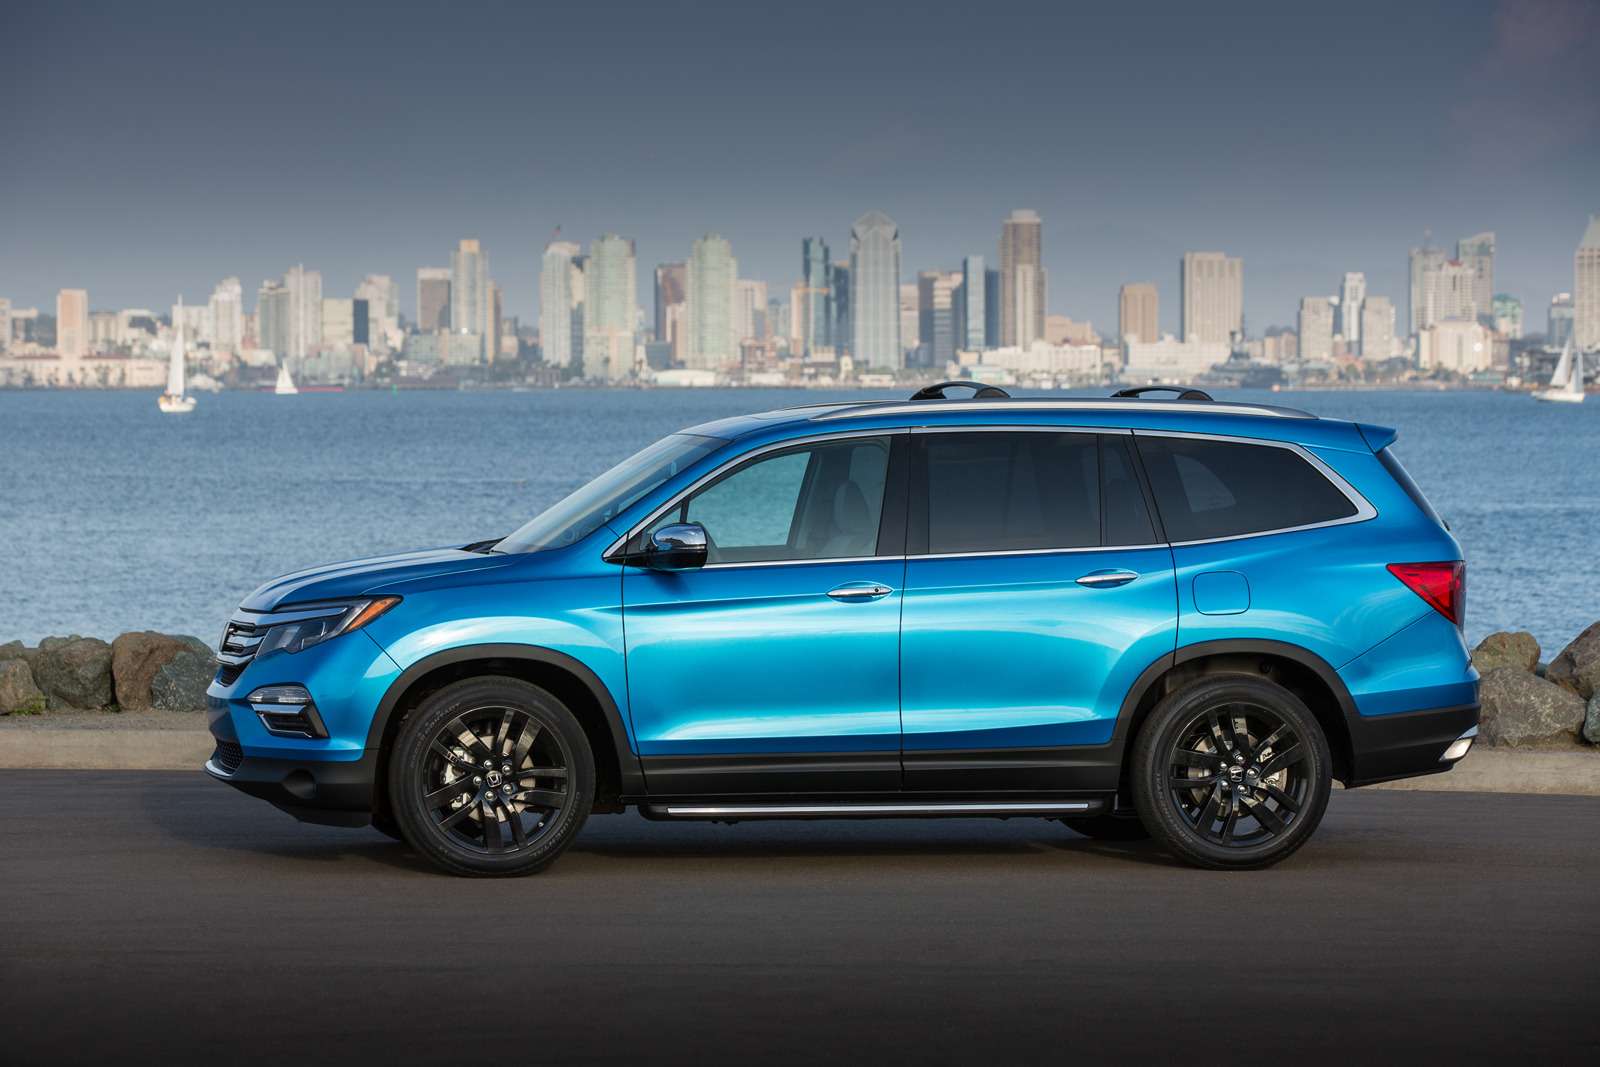 2016 Honda Pilot with accessory package